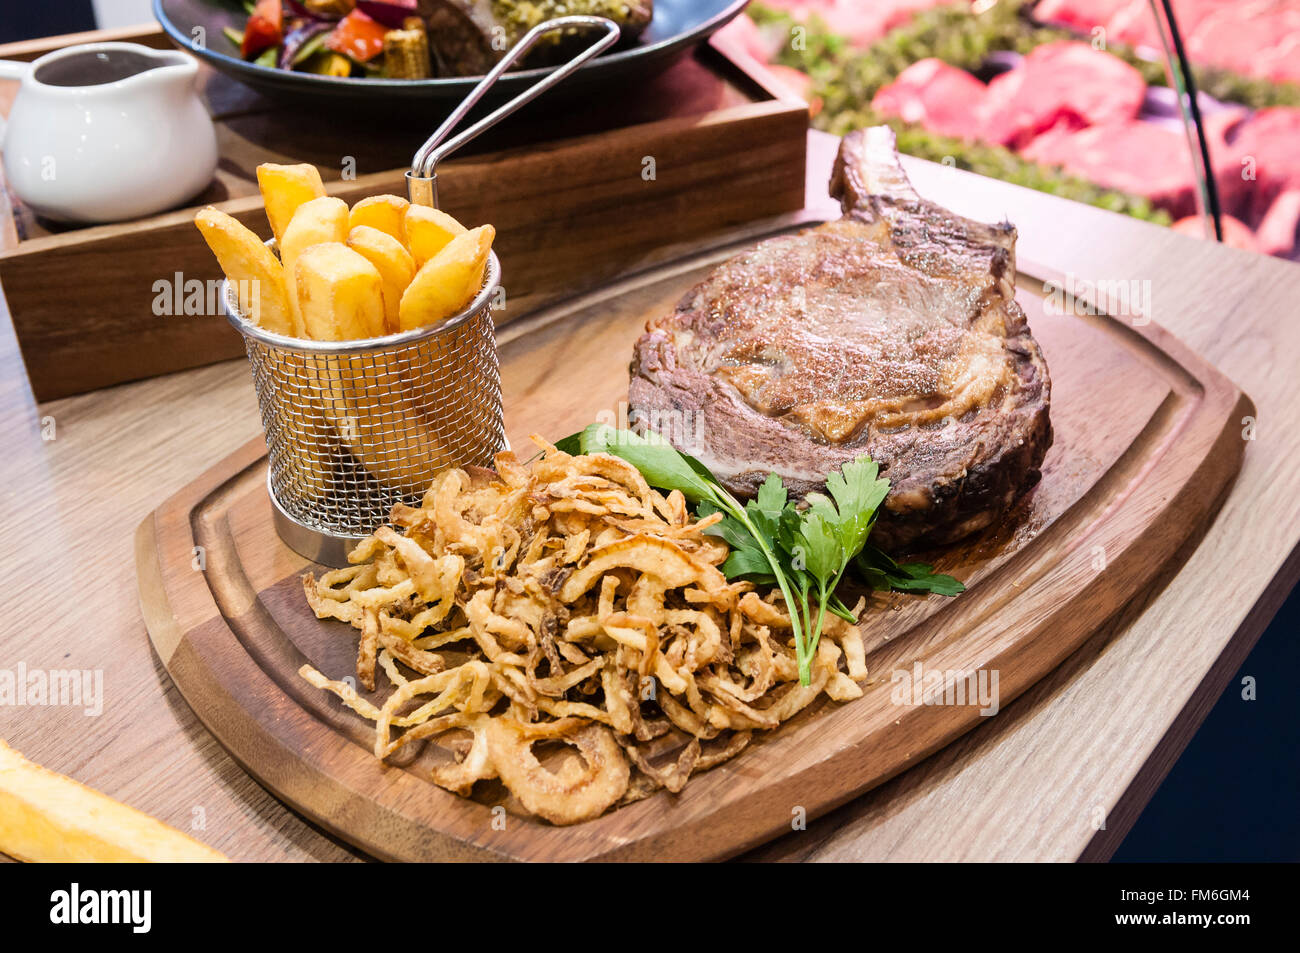 32oz tomahawk steak, chips and tobacco onions, presented on a wooden chopping board and wire basket. Stock Photo